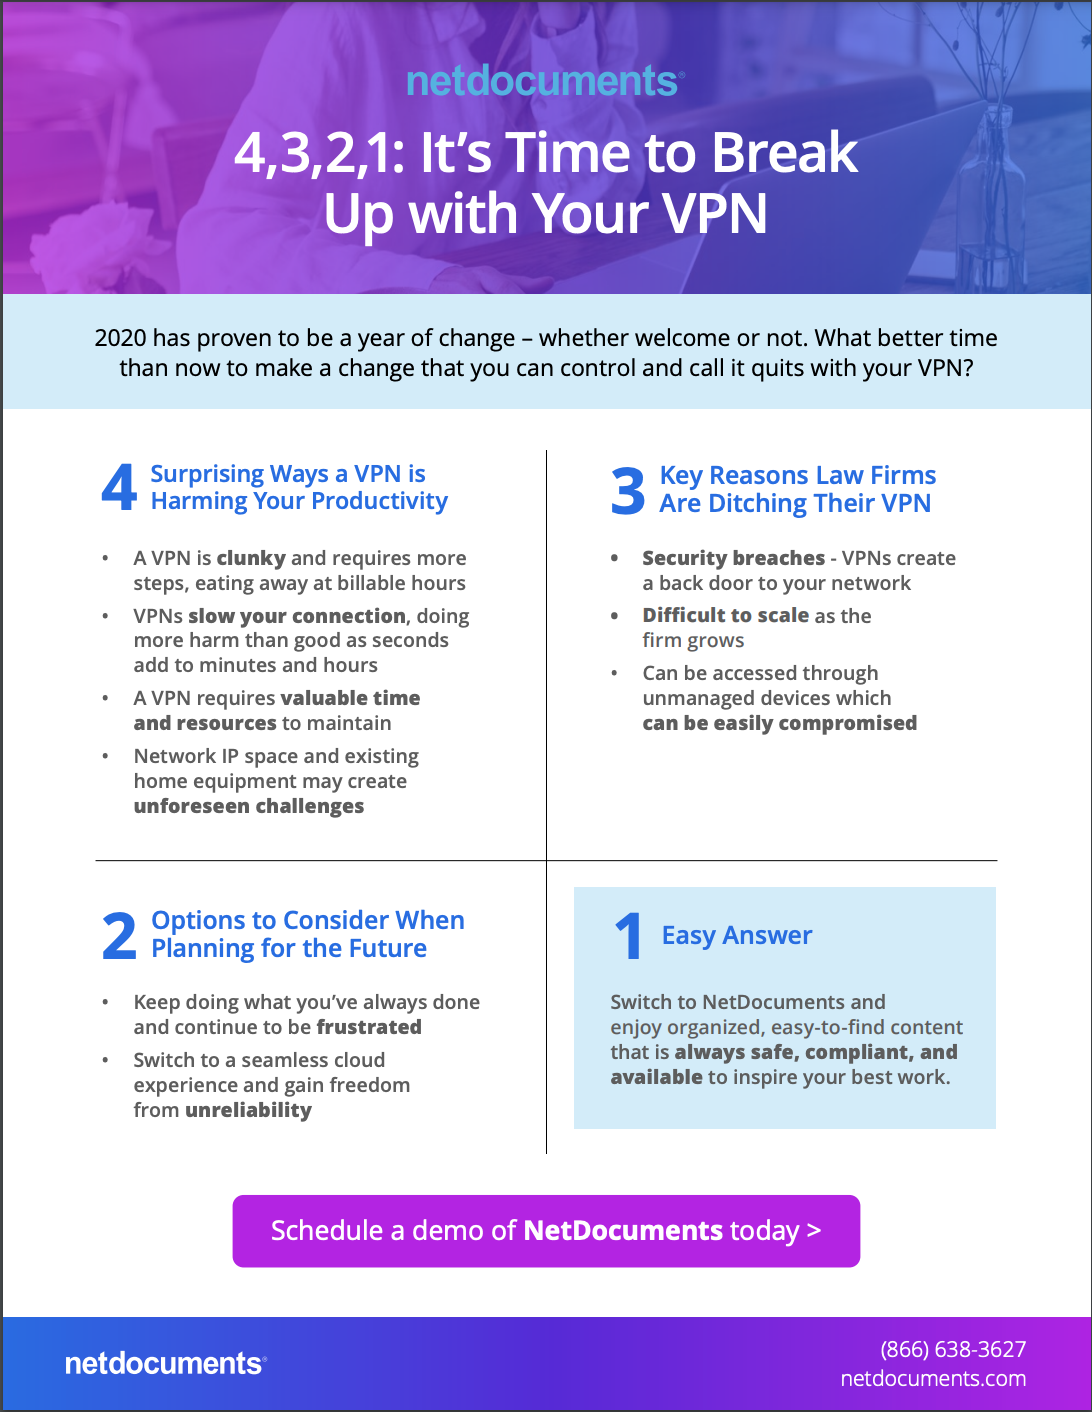 4, 3, 2, 1: It’s Time to Break Up with Your VPN